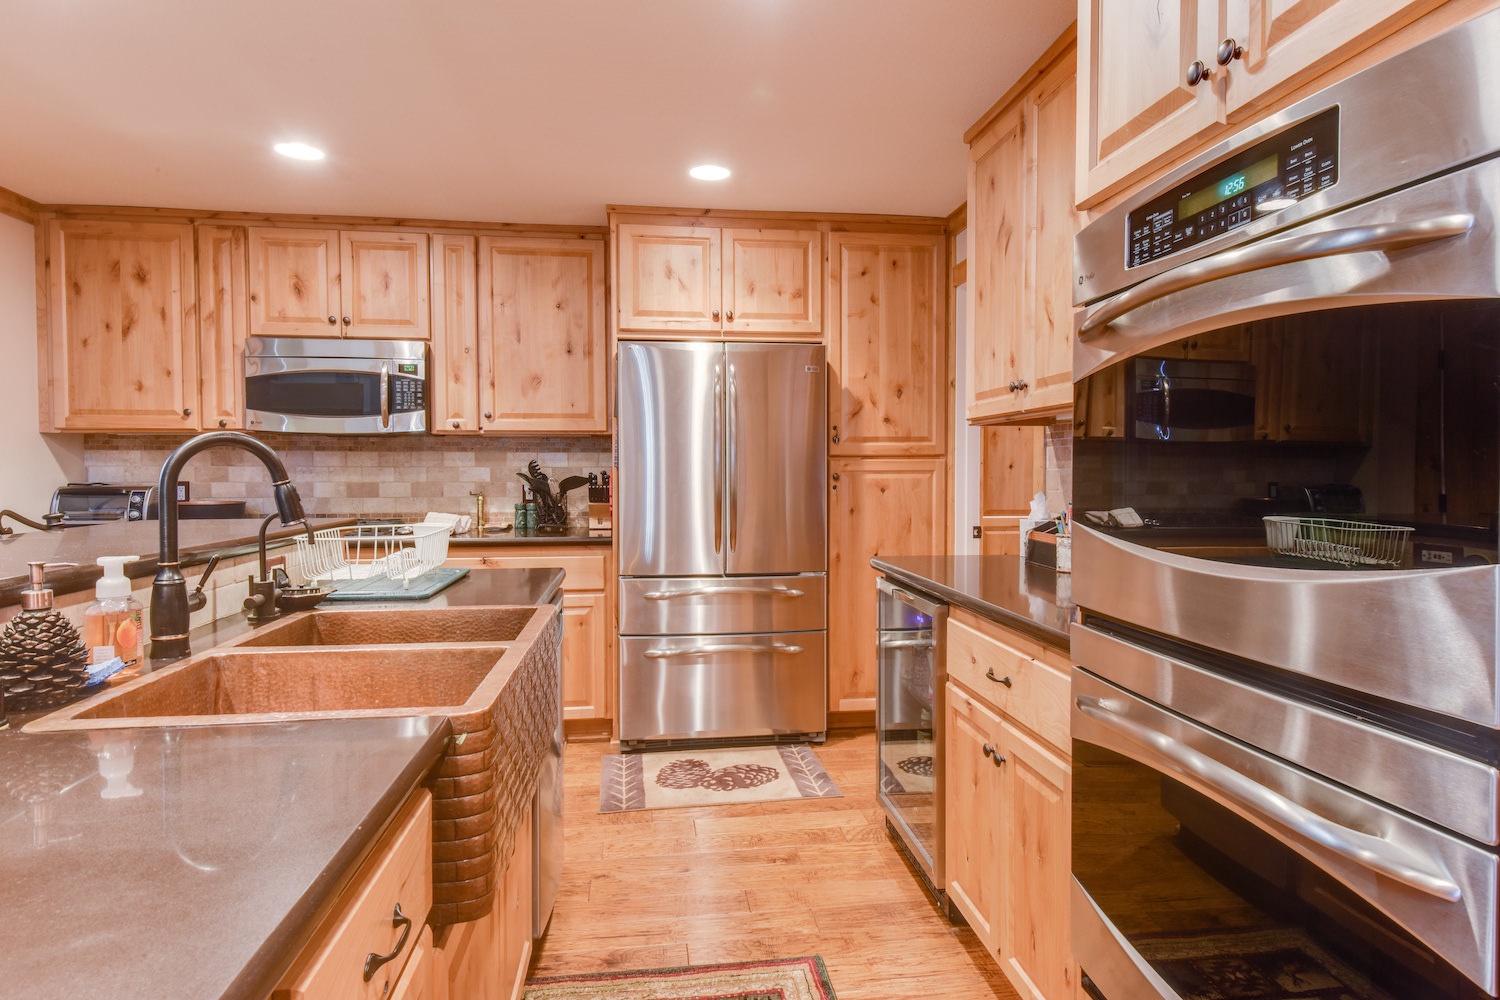 Full Kitchen with Stainless Steel Appliances